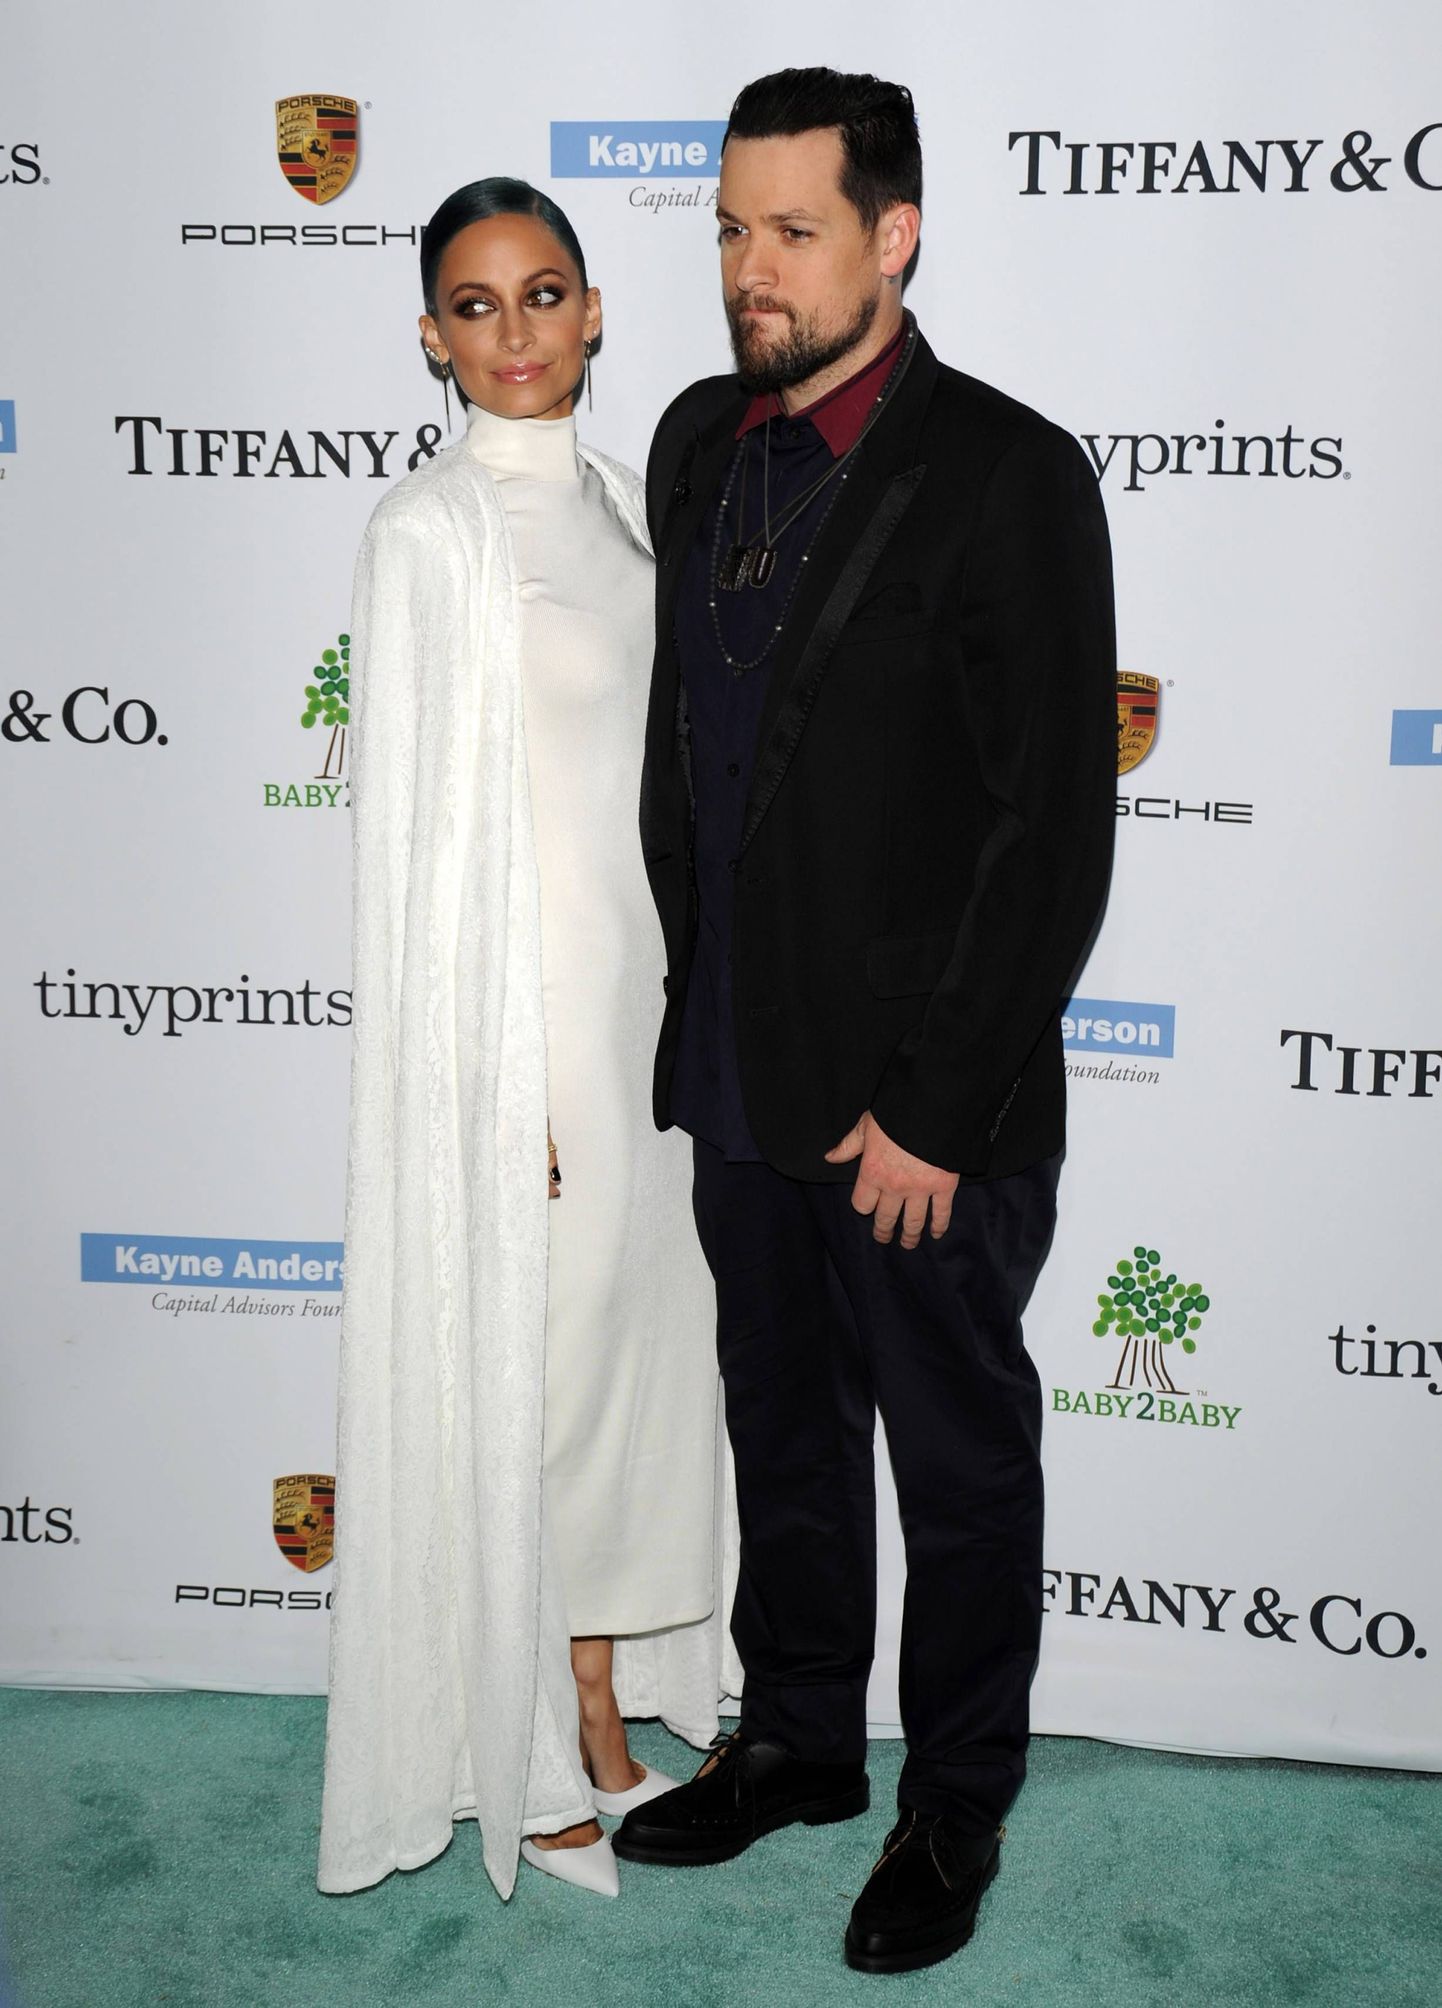 MAVRIXONLINE.COM - WORLDWIDE - Nicole Richie and Joel Madden at the 2014 Baby2Baby Gala honoring Kate Hudson held at The Book Bindery in Los Angeles, CA. November 8, 2014.
Byline, credit, TV usage, web usage or linkback must read MAVRIXONLINE.COM.
Failure to byline correctly will incur double the agreed fee.
Tel: +1 305 542 9275.